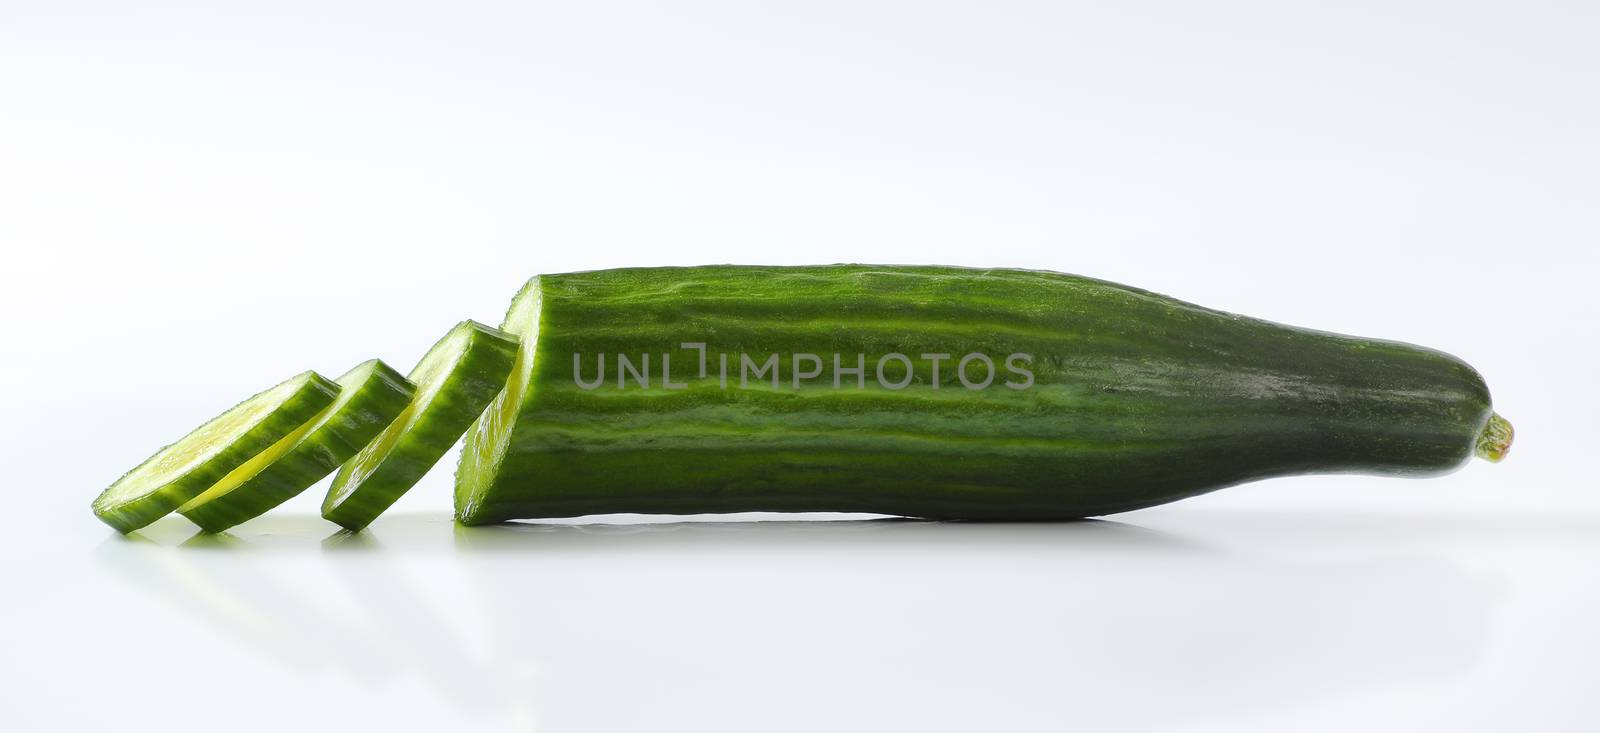 sliced green cucumber on white background - close up